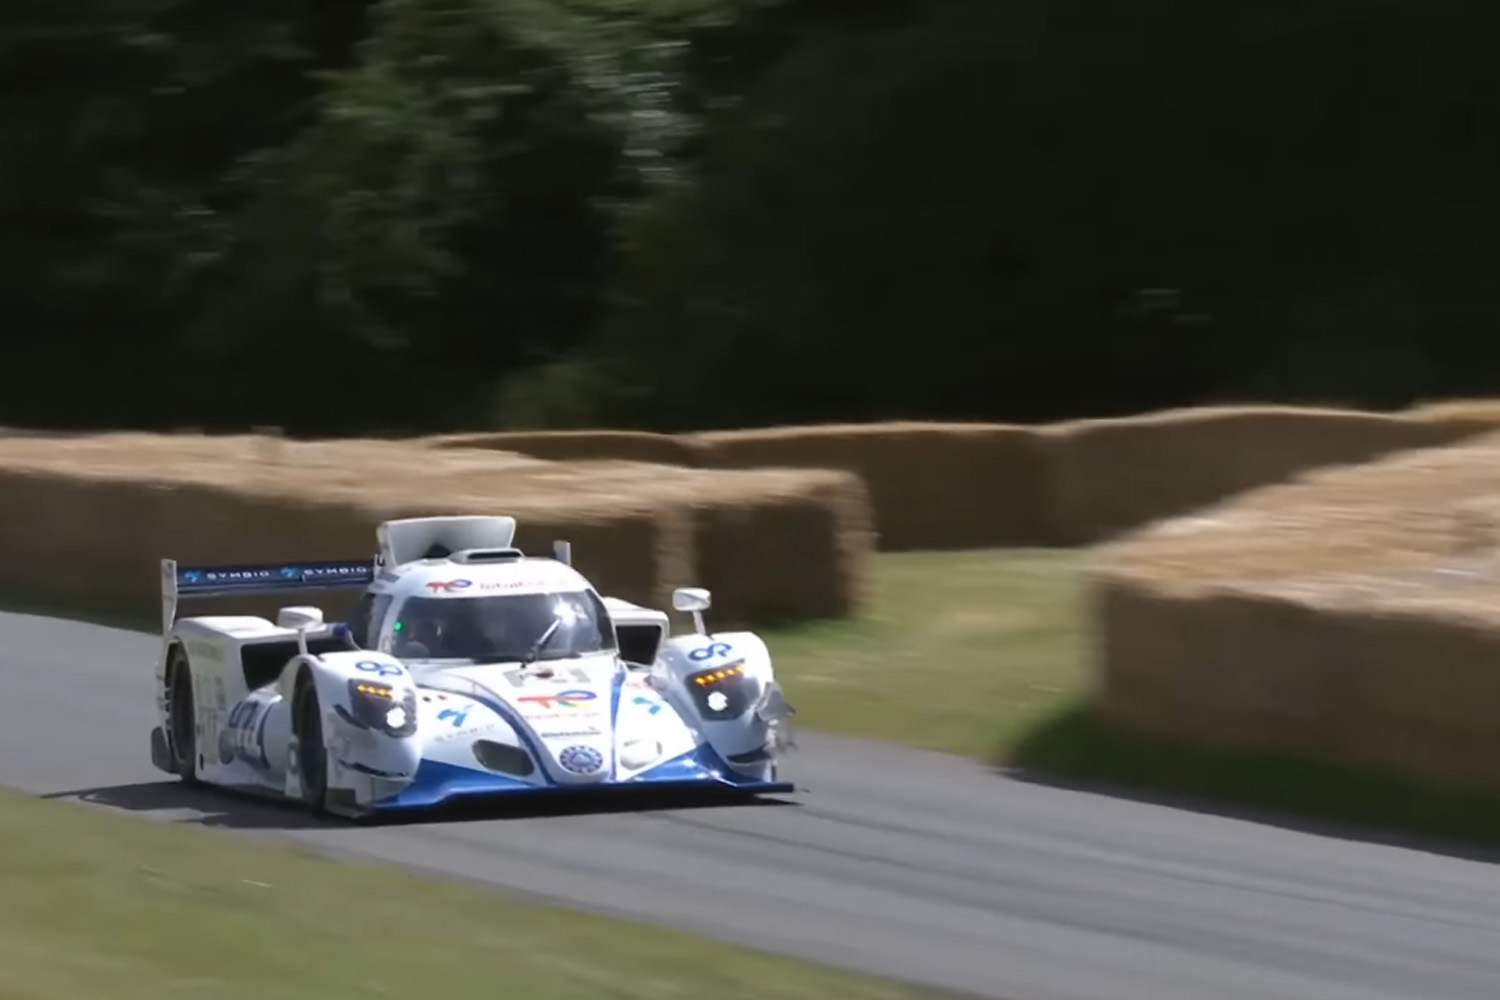 H24 Green GT on track at Goodwood Festival of Speed ​​Top 10 Fastest Cars